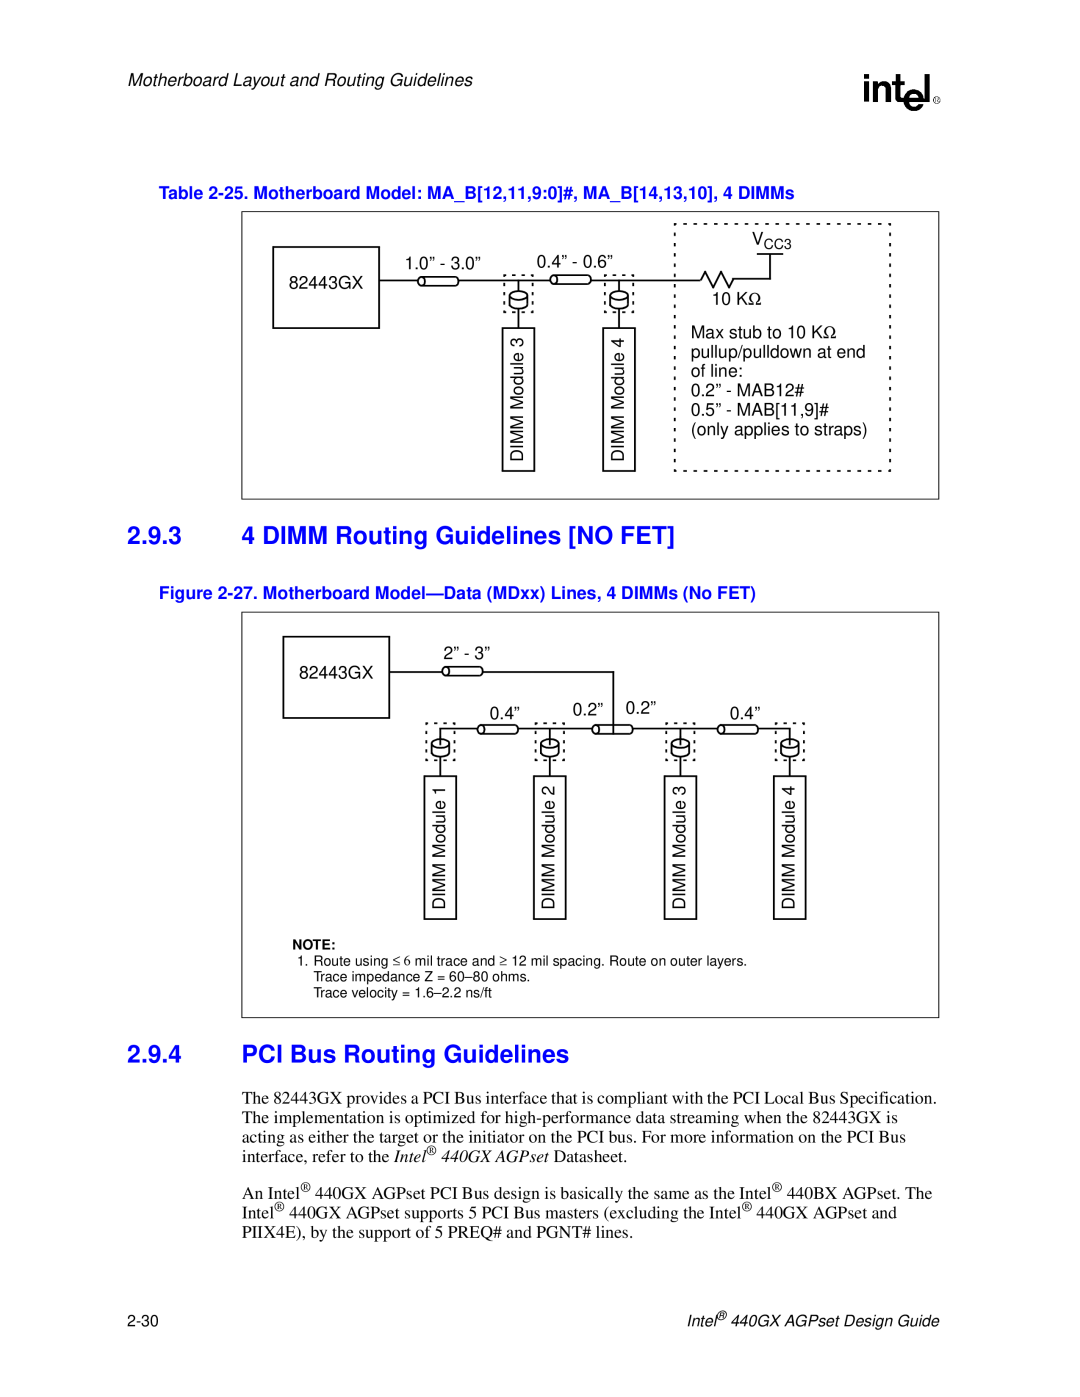 Intel 440GX 2.9.3 4 DIMM Routing Guidelines NO FET, PCI Bus Routing Guidelines, Motherboard Layout and Routing Guidelines 